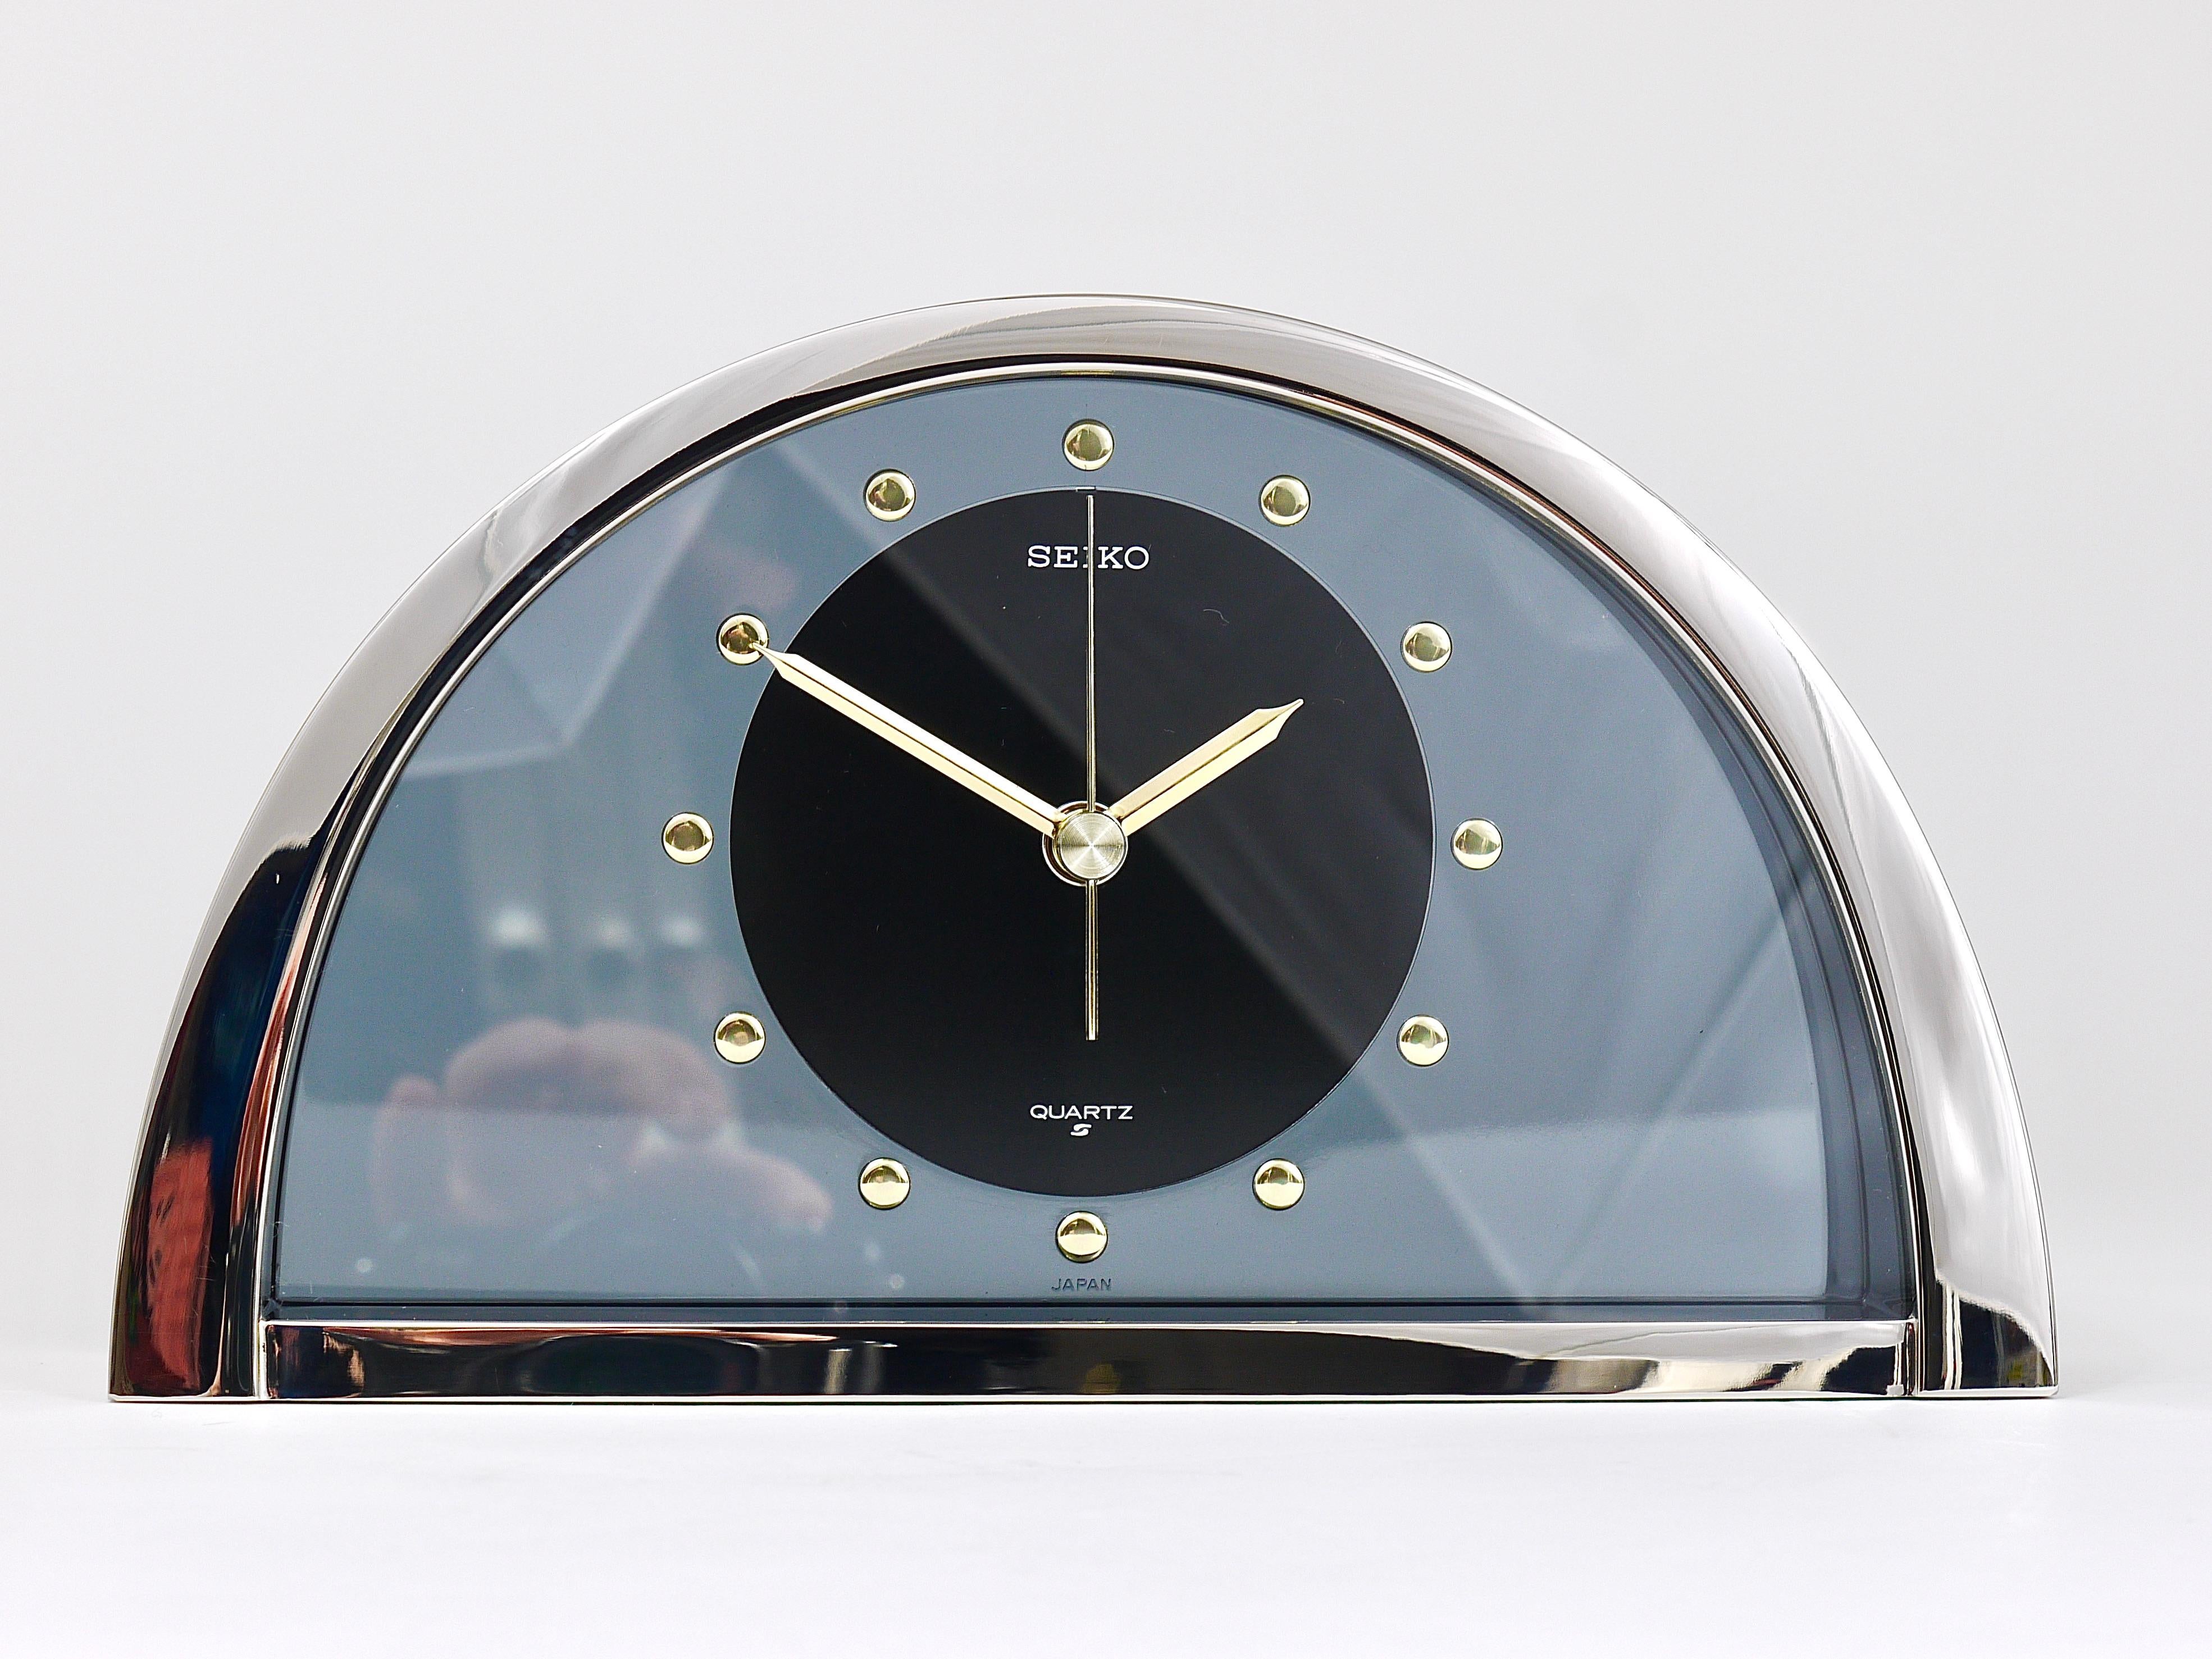 A decorative Hollywood Regency desk / table / mantel clock from the 1980s. It has a brushed chrome-plated housing with mirror polished front, nice golden handles and indices and a smoked-grey transparent 